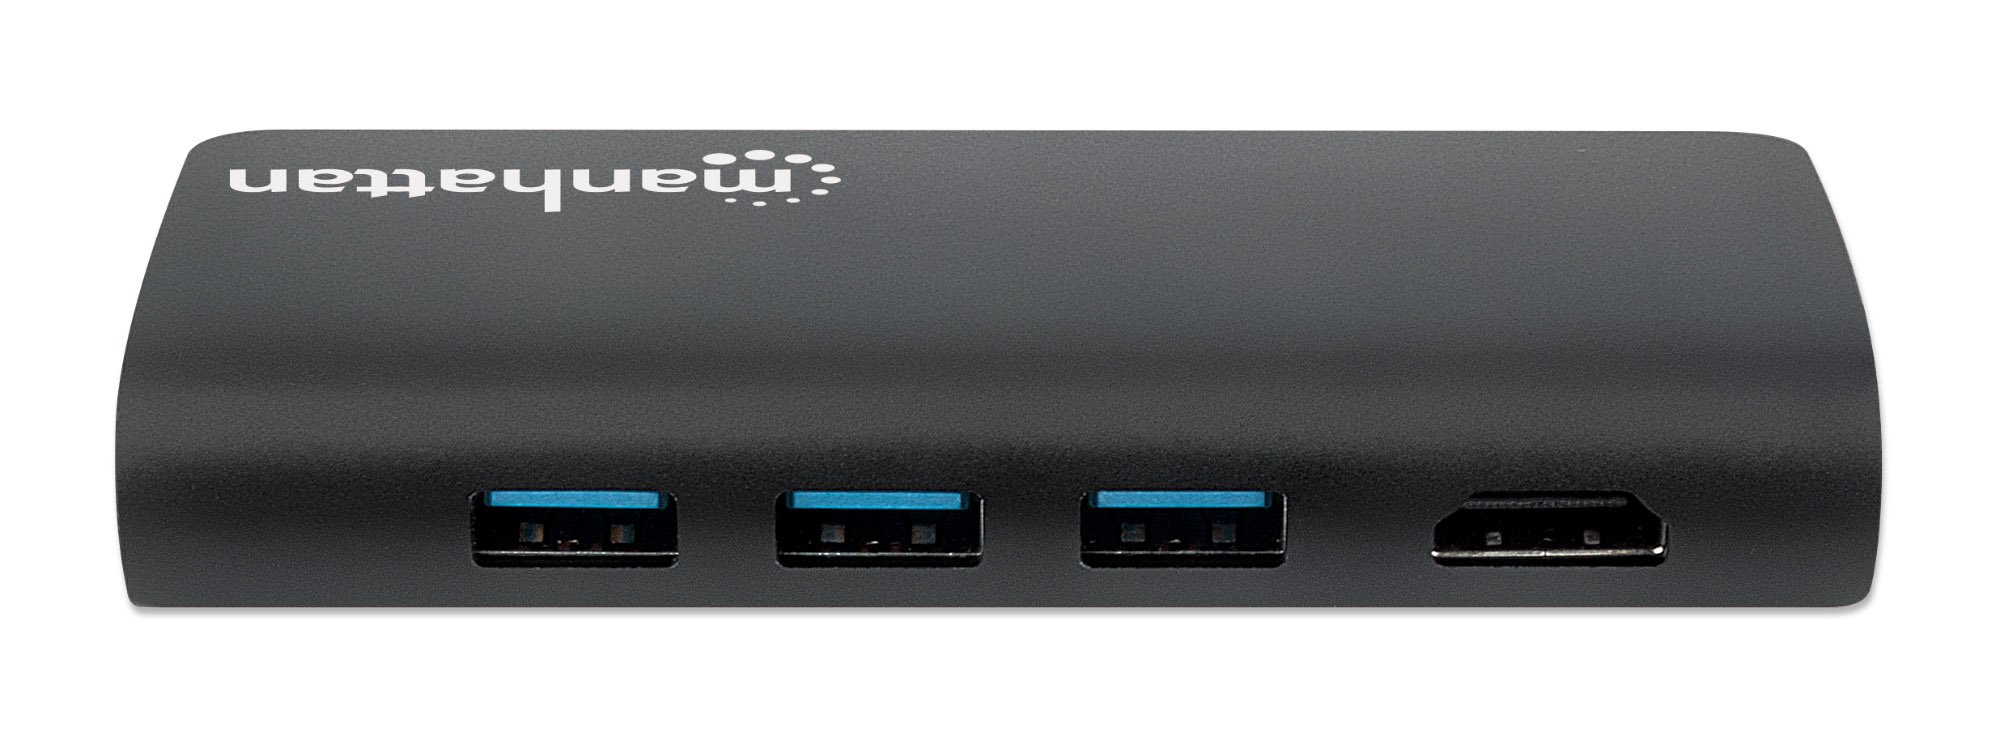 Manhattan USB-C 5-Port Hub/Dock/Converter, USB-C to USB-C (including Power Delivery), 3x USB-A and Gigabit RJ45 Ports with Card Reader, Male to Females, 5 Gbps (USB 3.2 Gen1 aka USB 3.0), 1x Ethernet 10/100/1000 Mbps network, SD/Micro SD, Cable 30cm, Alum